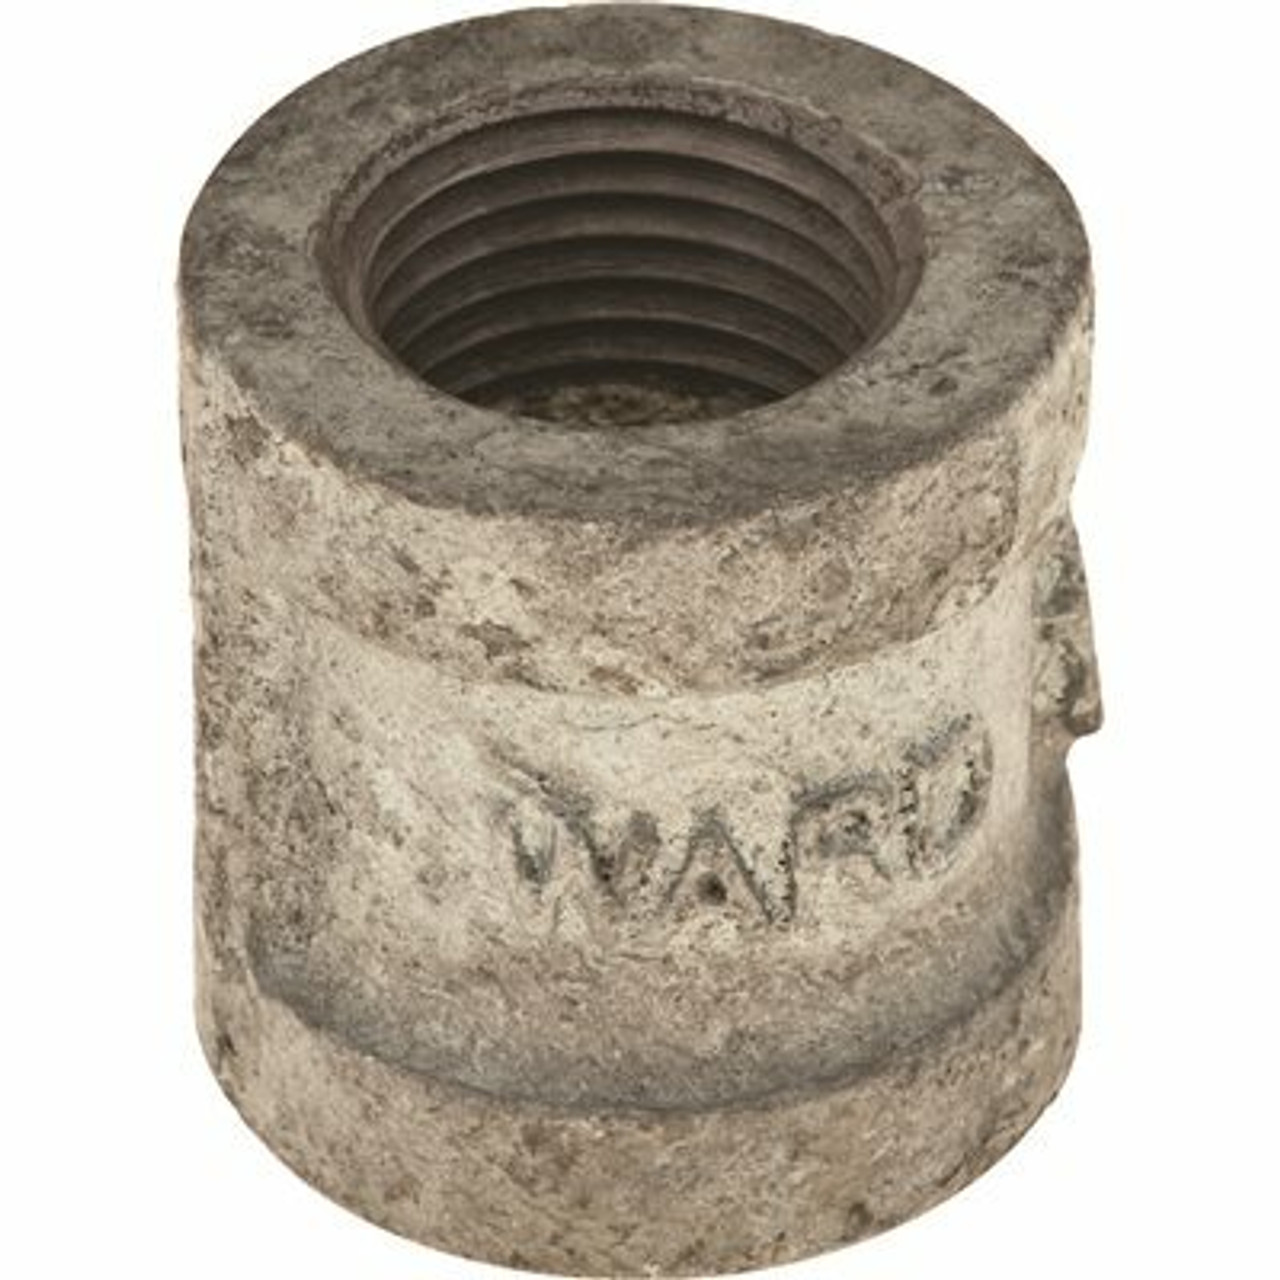 Ward Mfg. Galvanized Malleable Coupling 1/2 In.